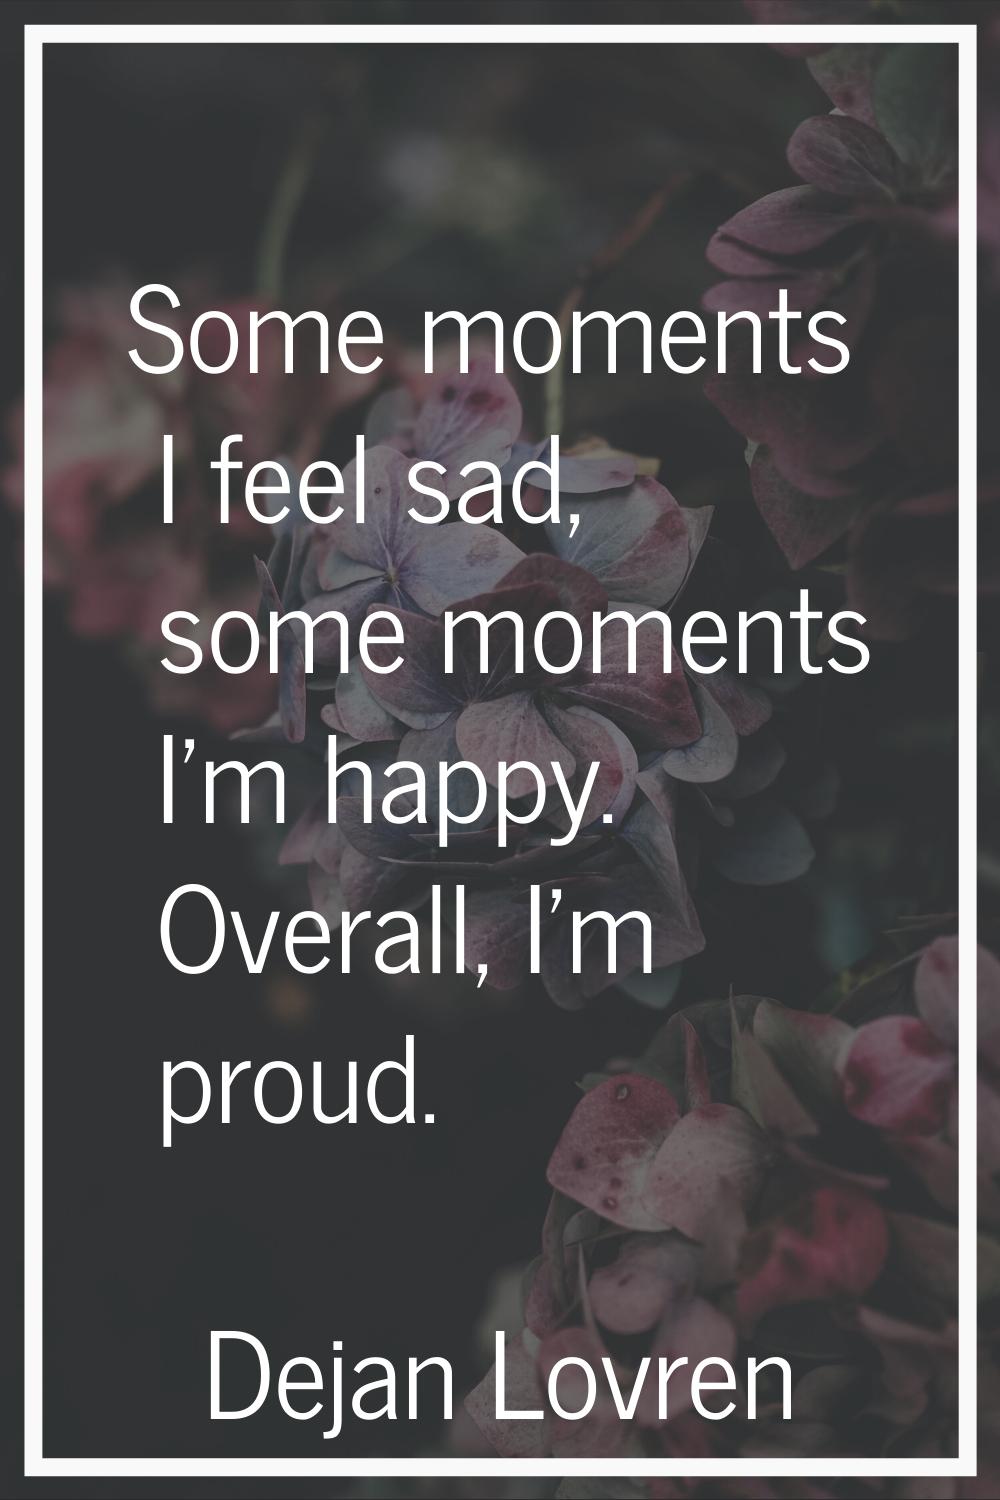 Some moments I feel sad, some moments I'm happy. Overall, I'm proud.